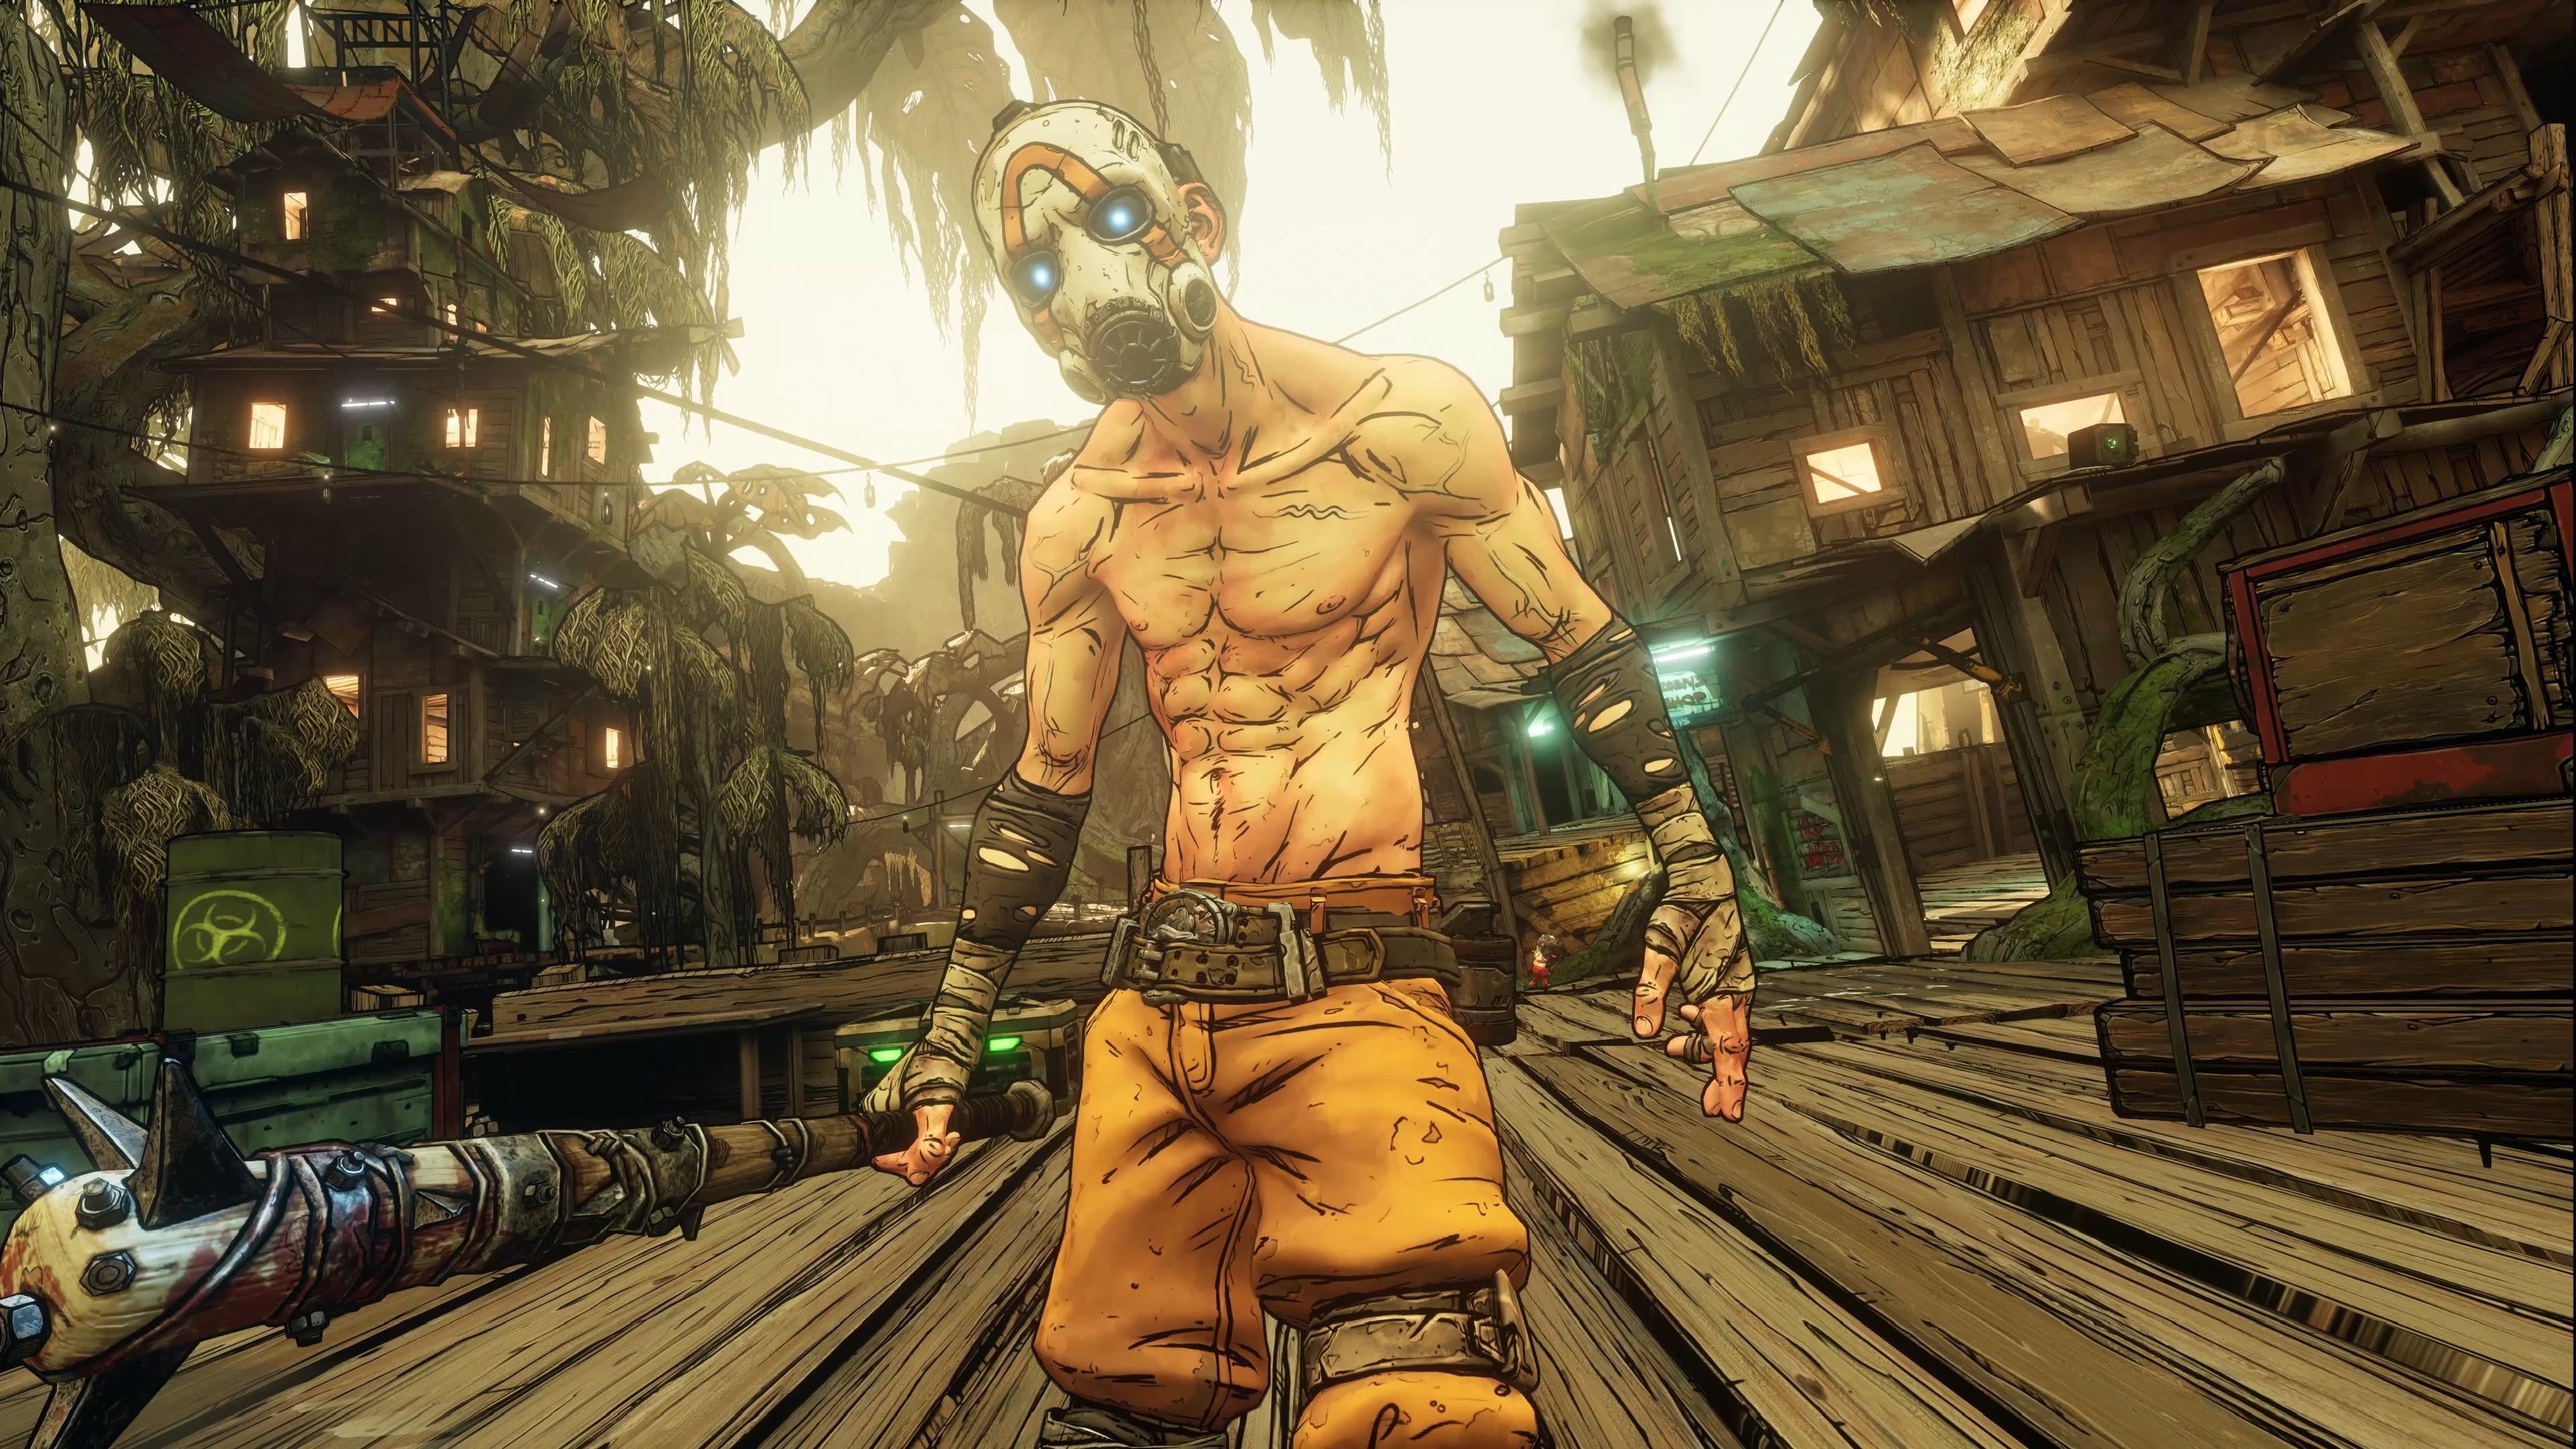 Image for Borderlands 3 goes full Lovecraft in this 12 minute gameplay chunk from Guns, Love, and Tentacles